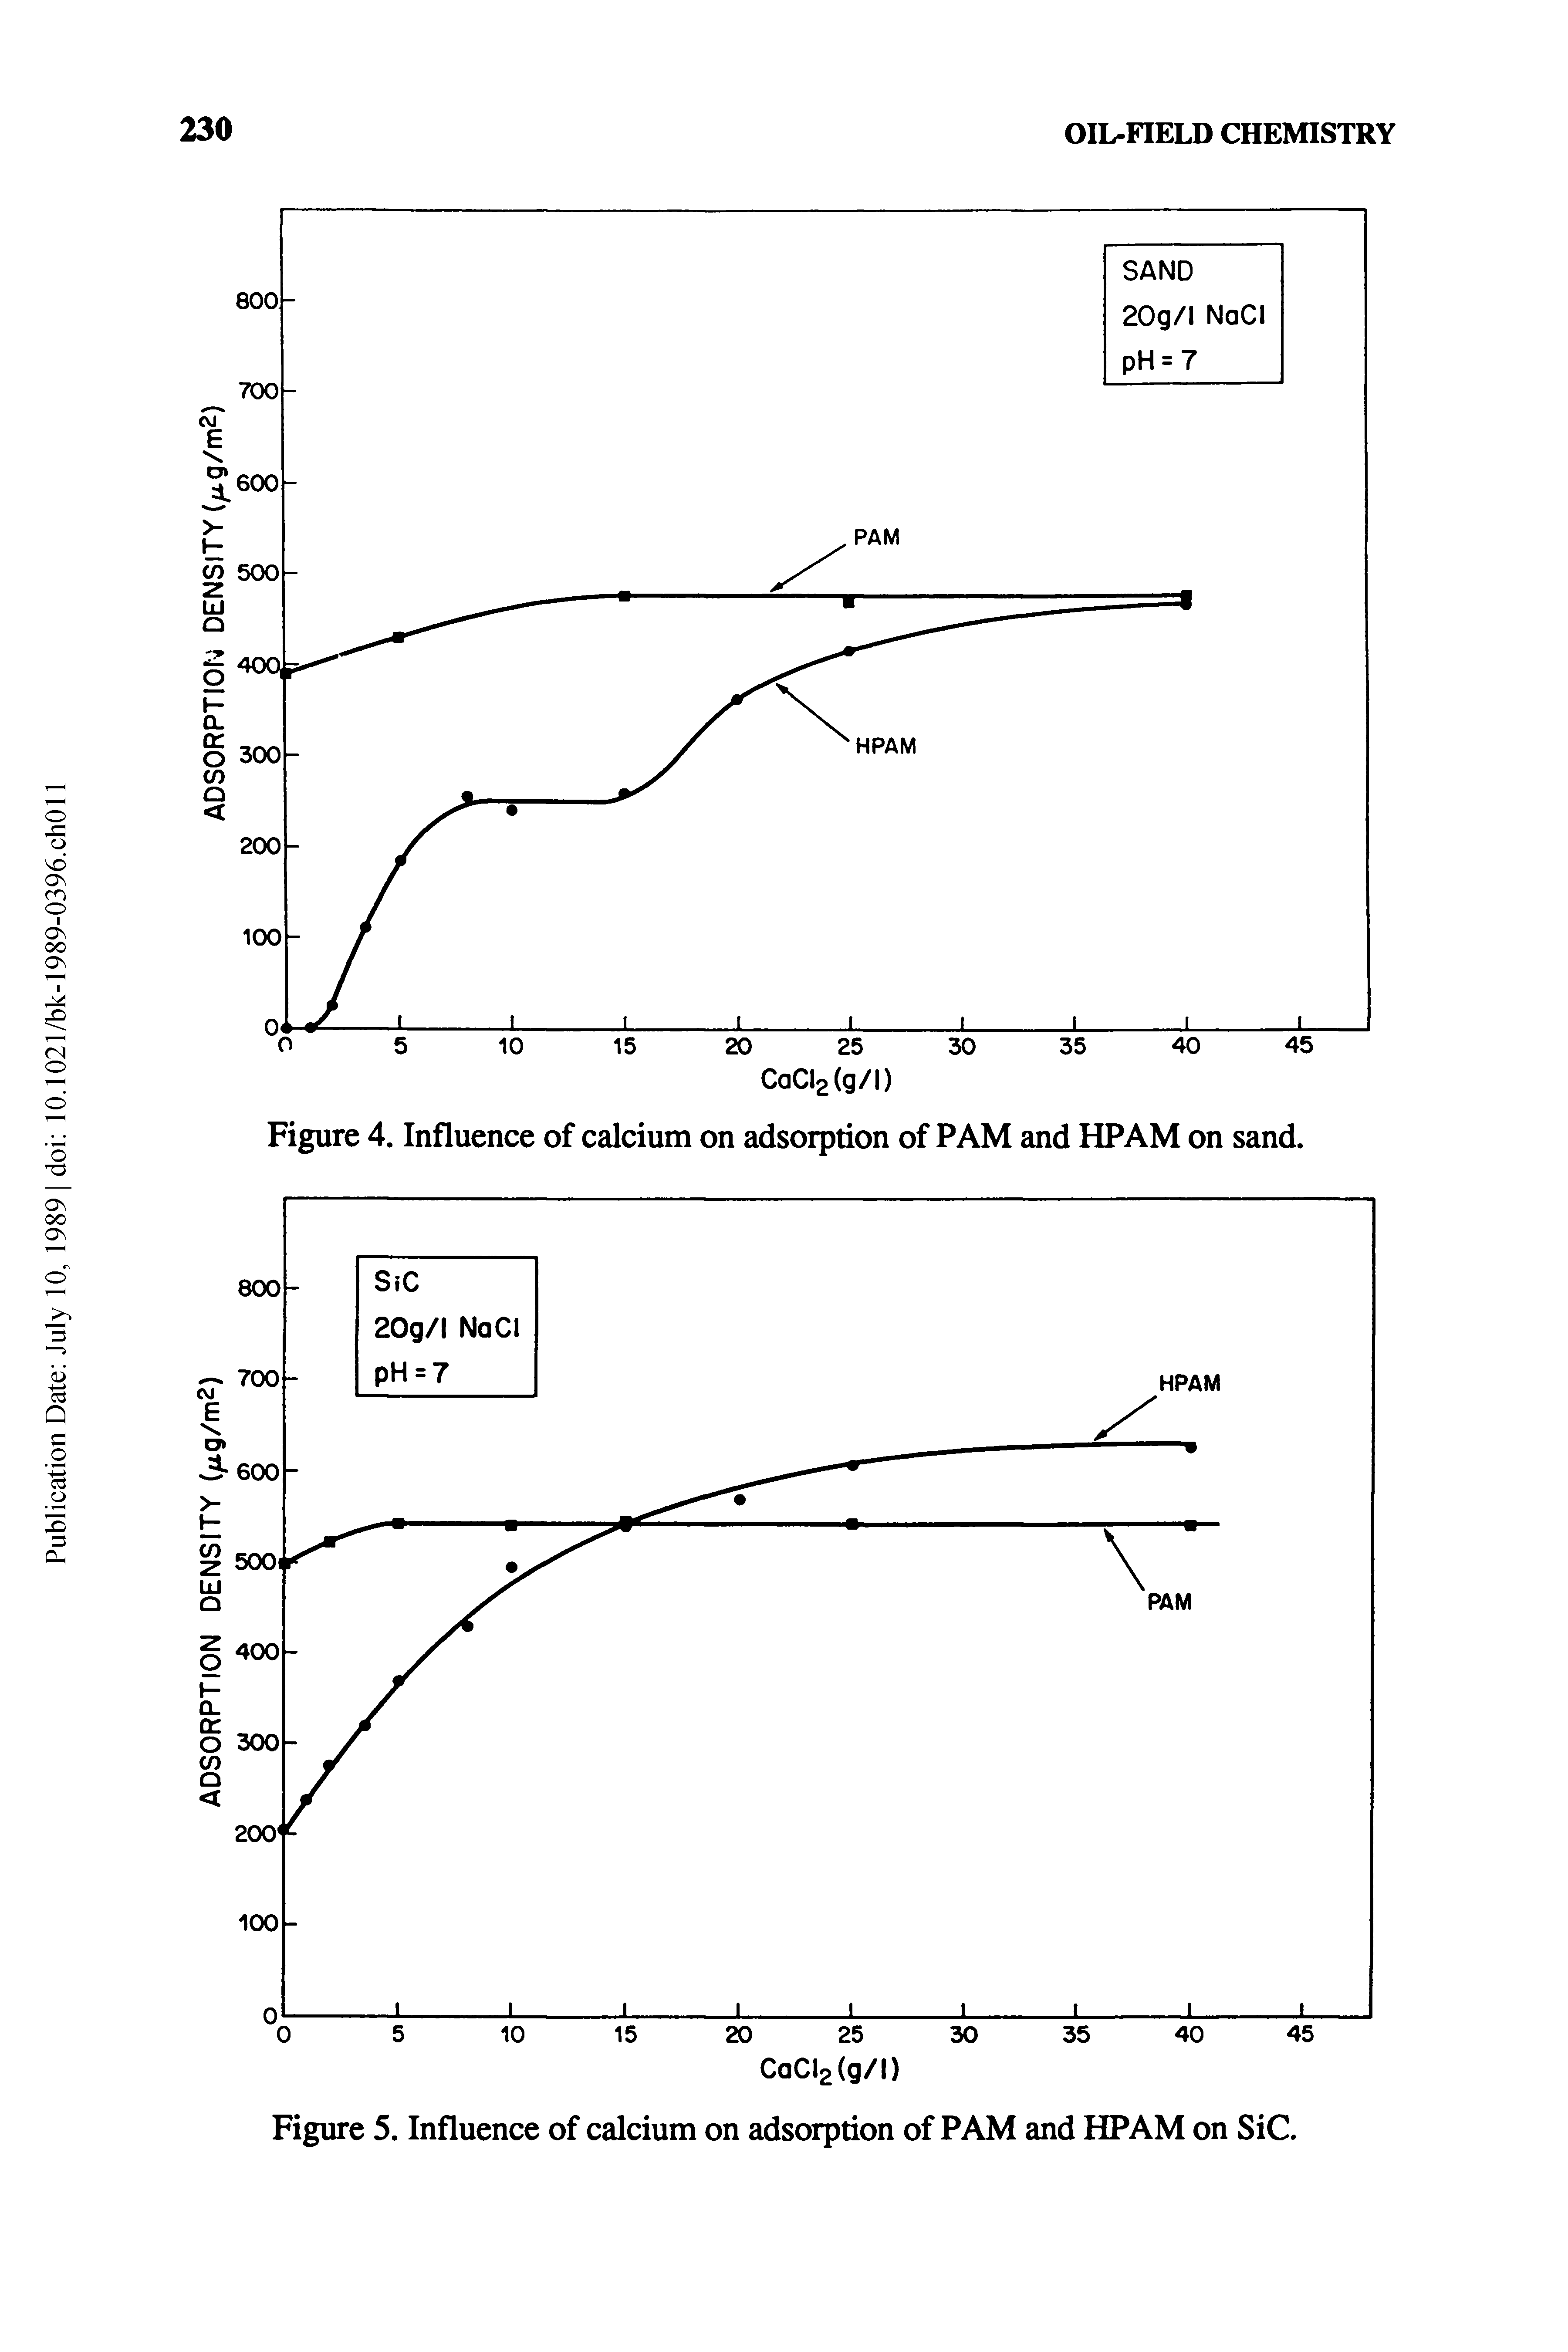 Figure 4. Influence of calcium on adsorption of PAM and HPAM on sand.